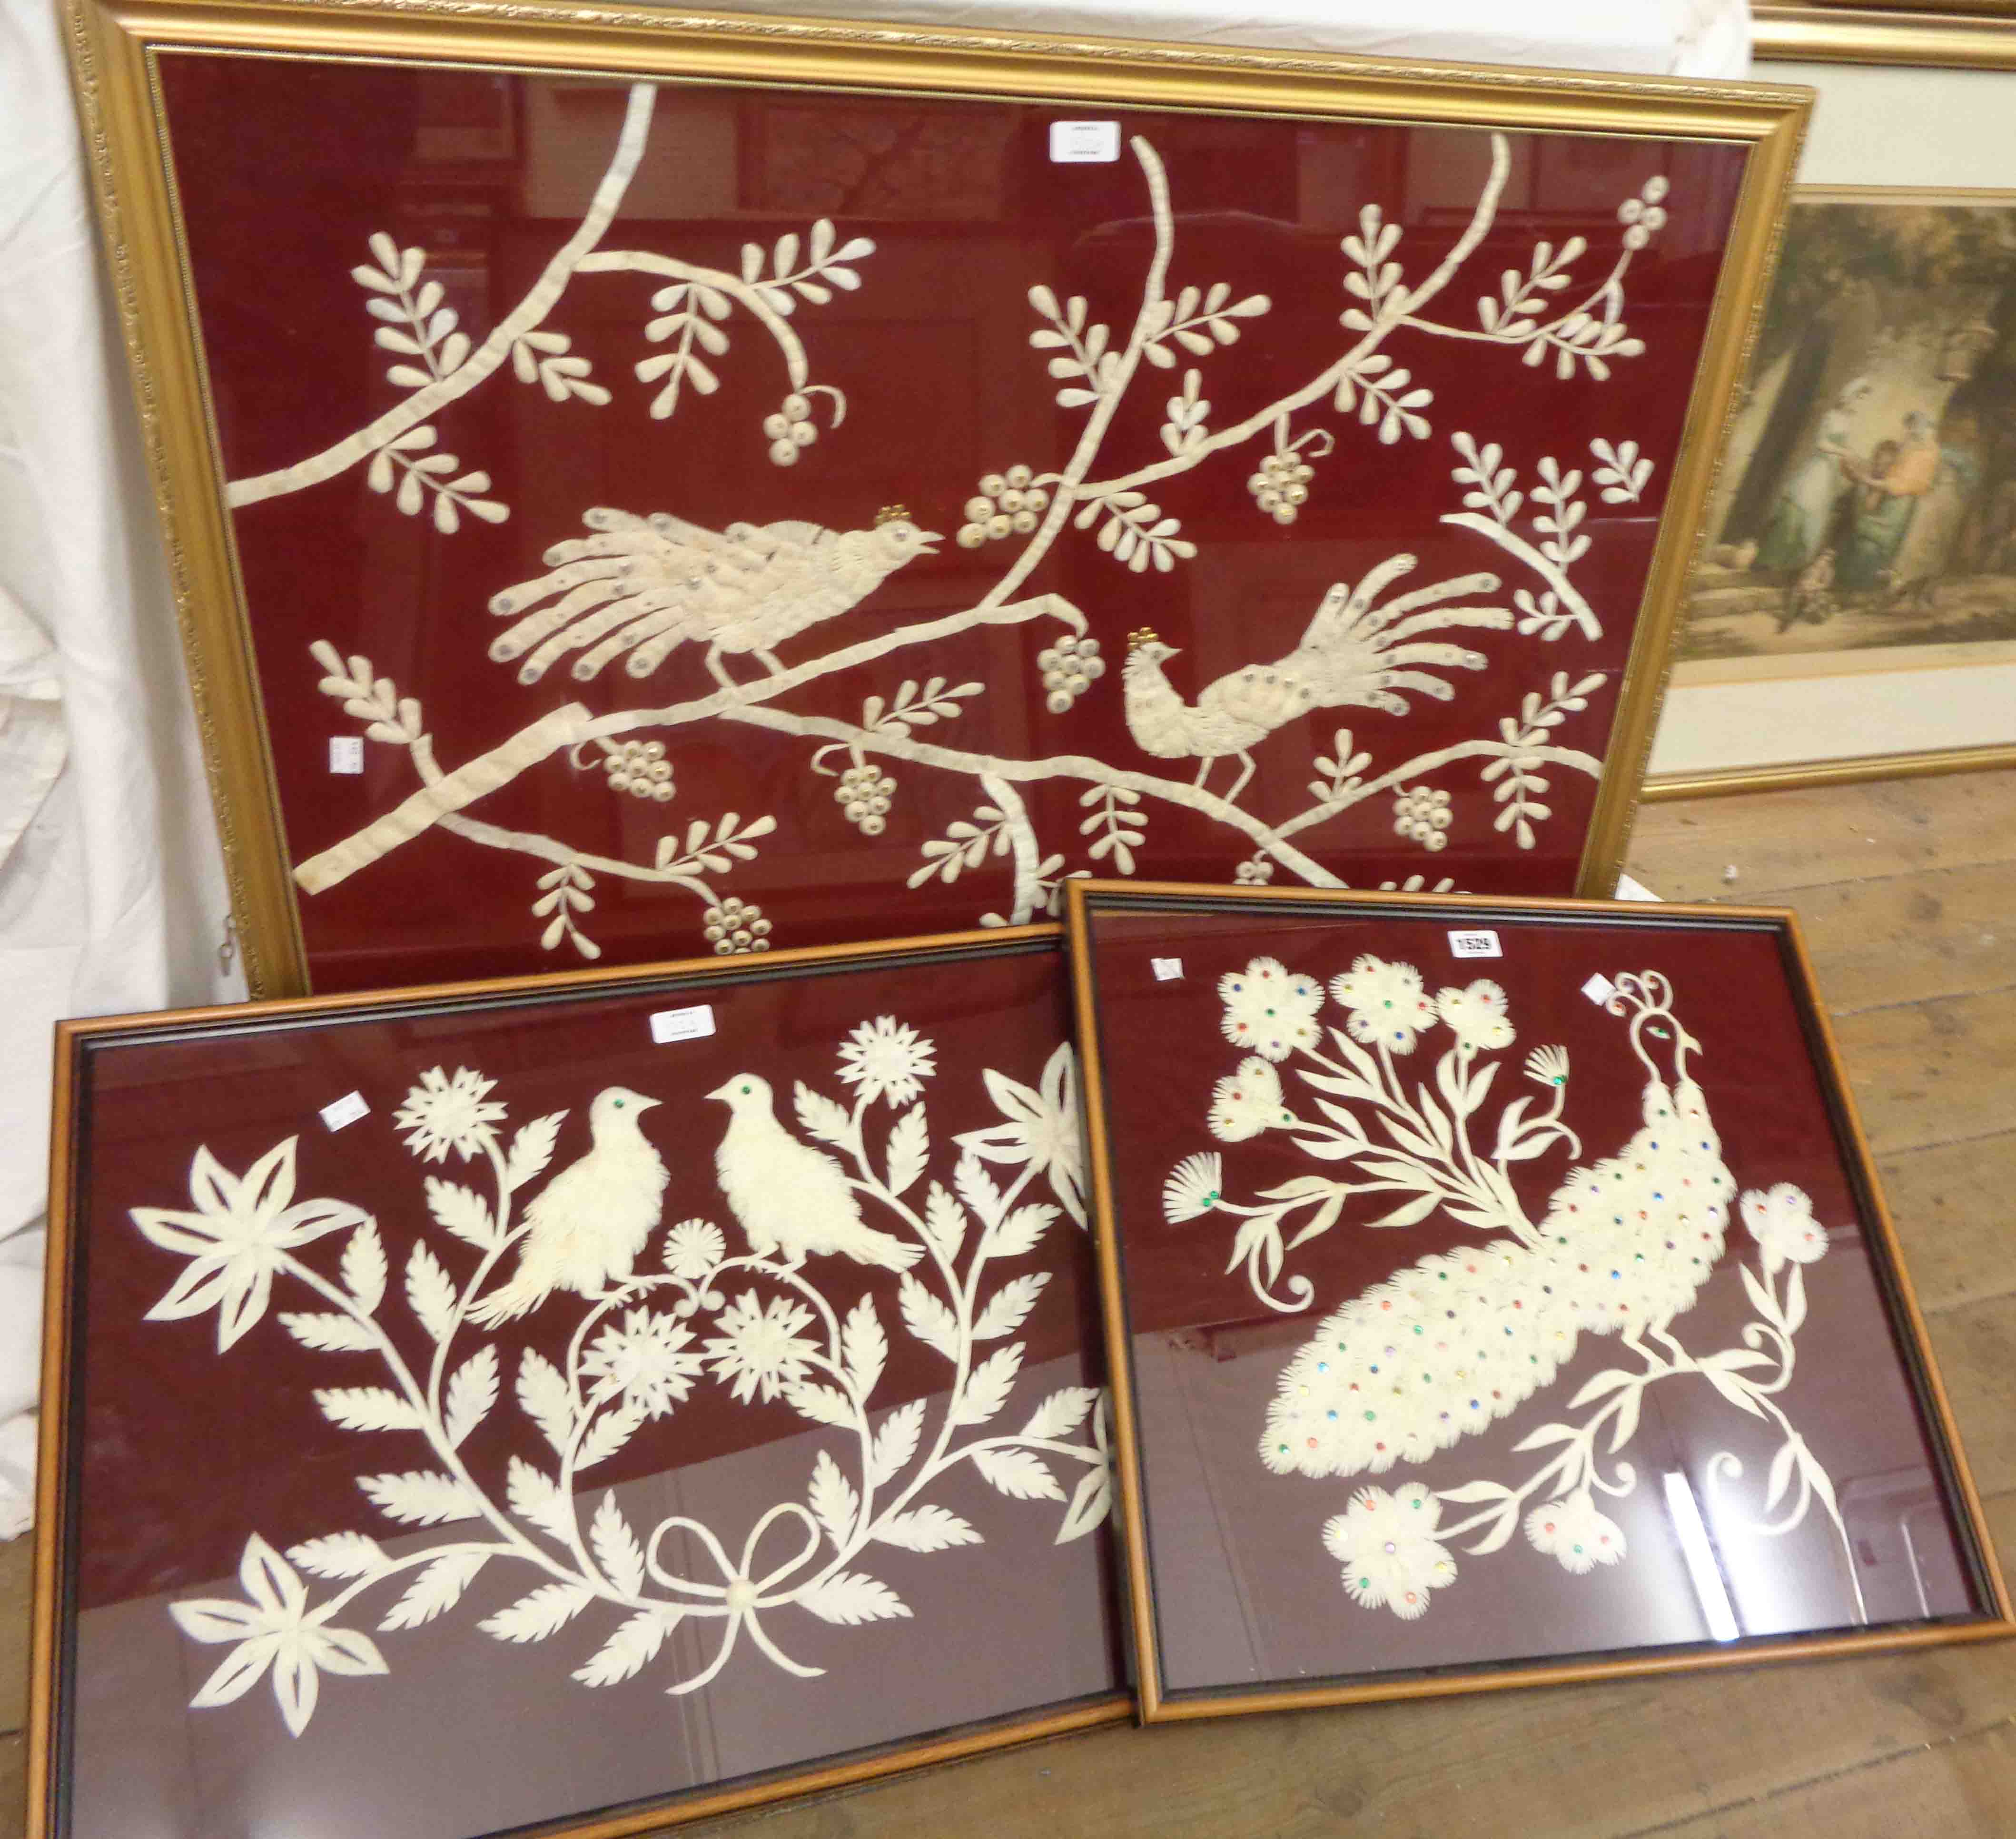 Three framed decorative embroidery pictures, all depicting perching birds